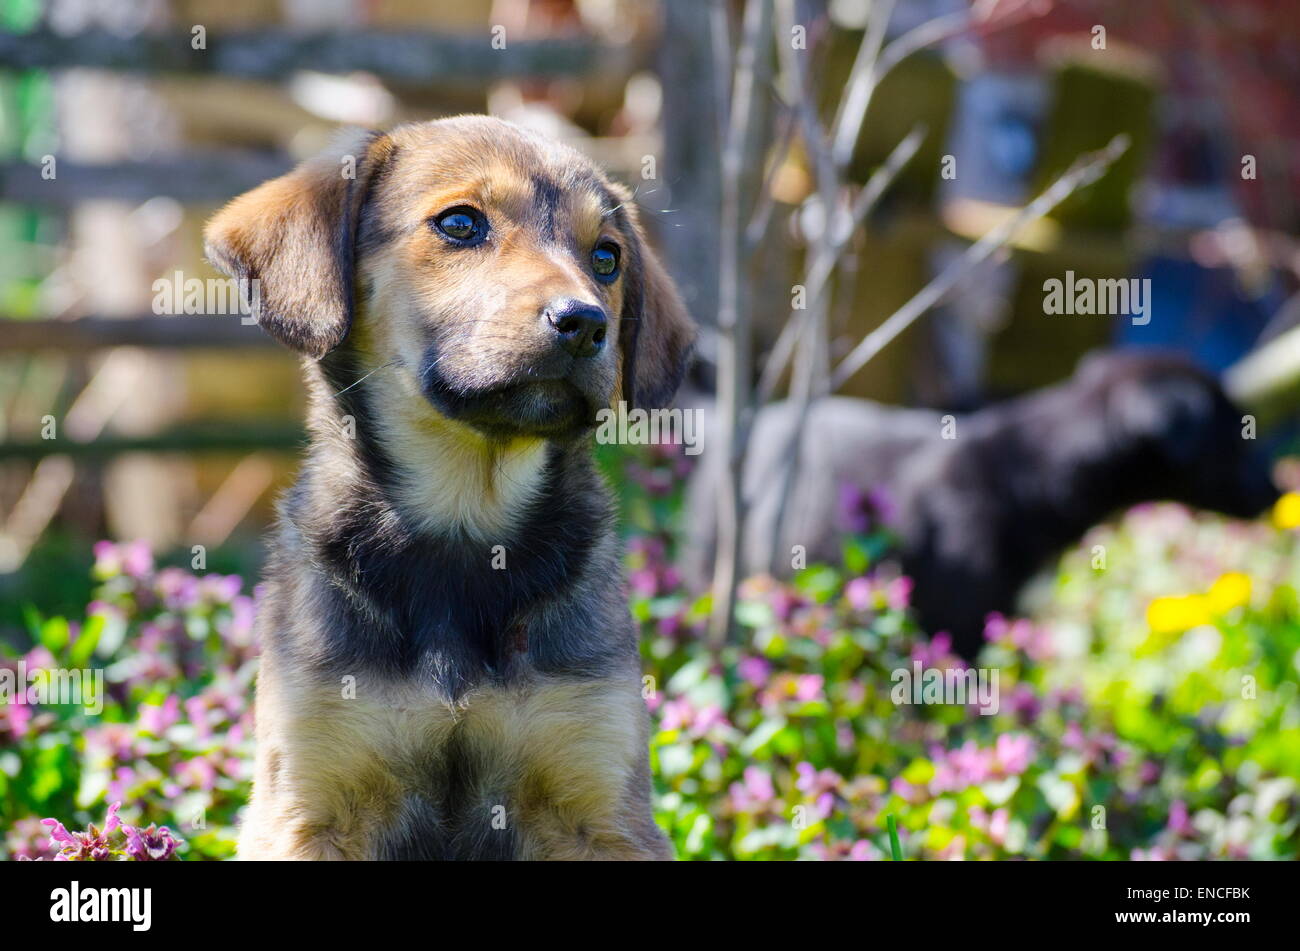 Mix breed puppy among the grass leaves and colorful field flowers Stock Photo